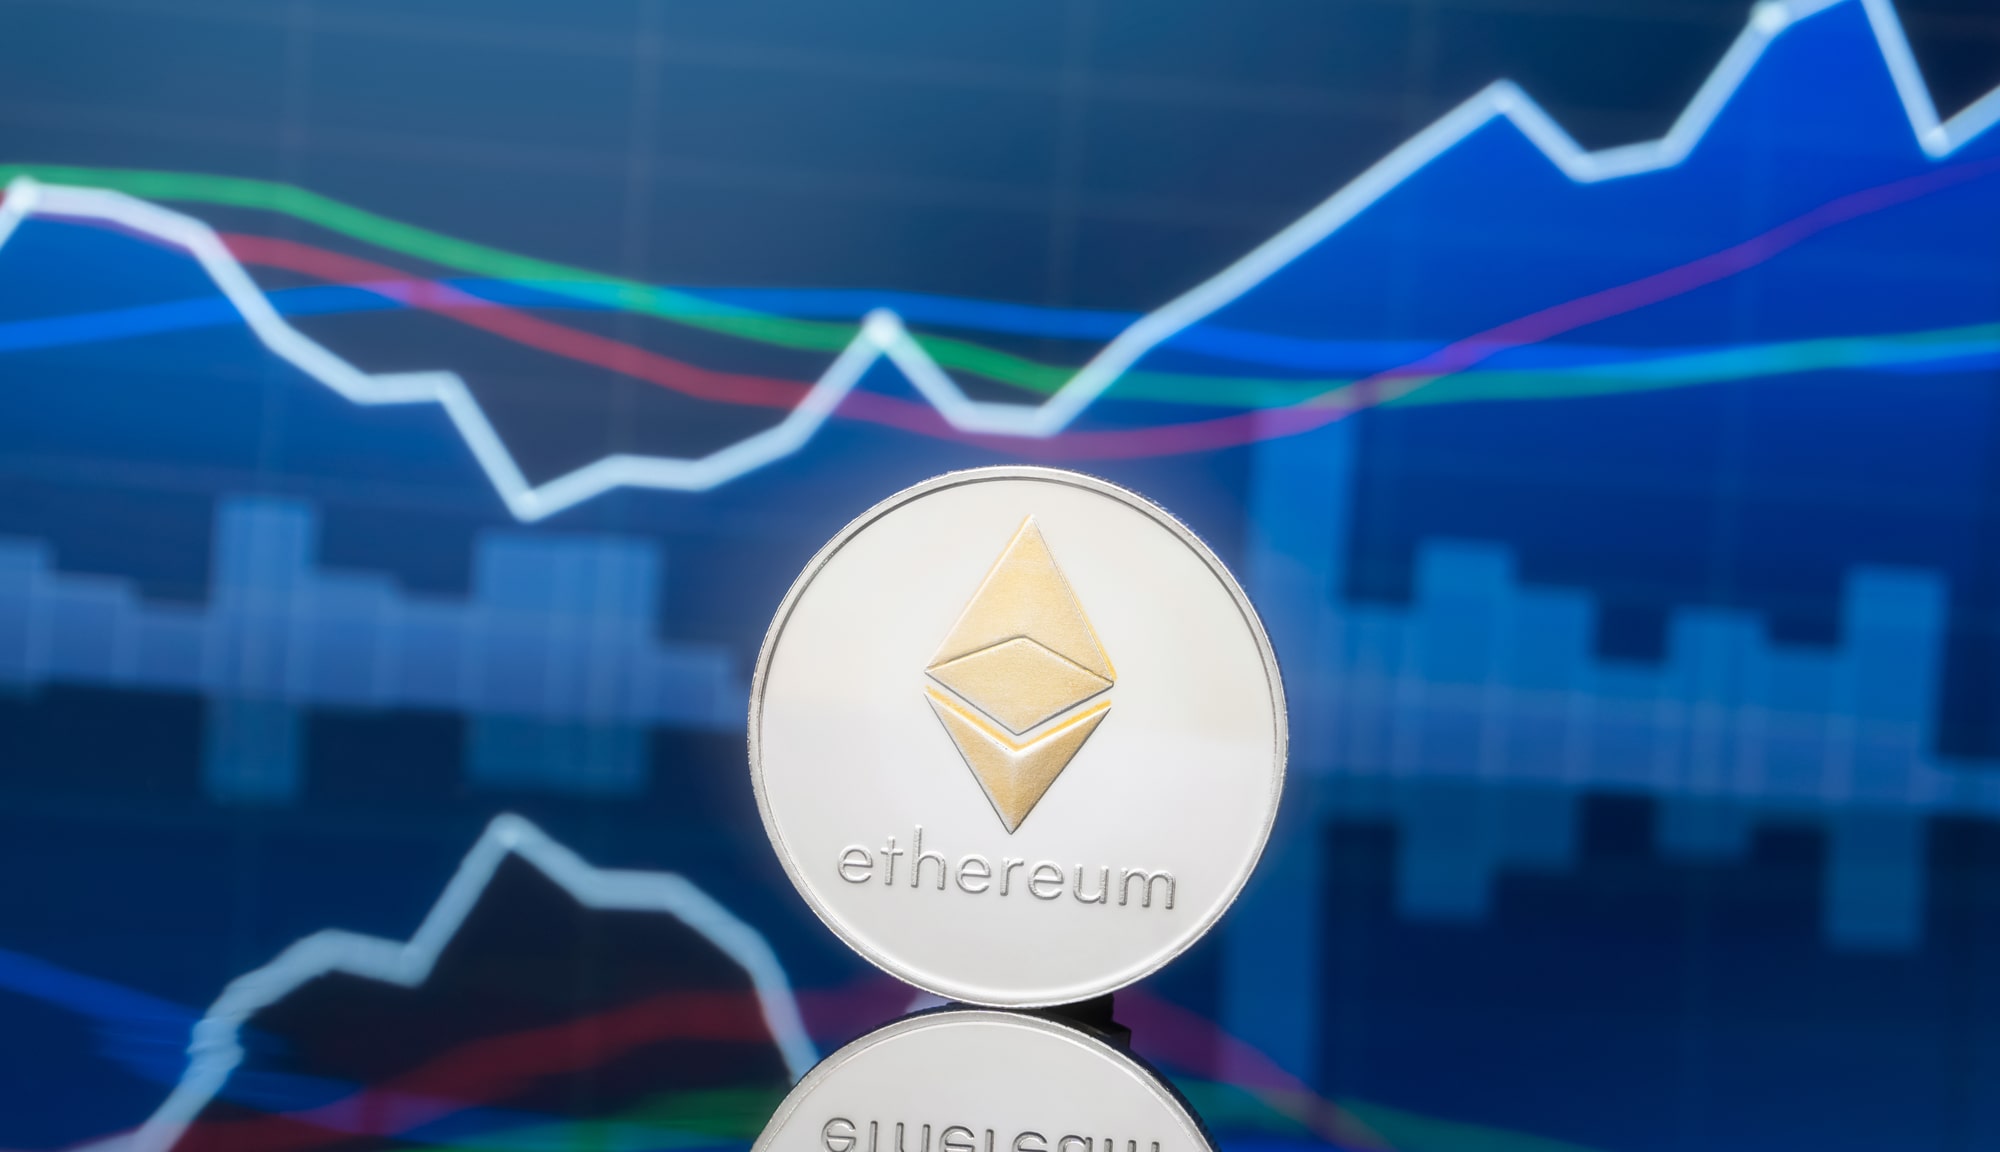 Ethereum climbs to all-time high of $4,400, as Shiba Inu burns ETH